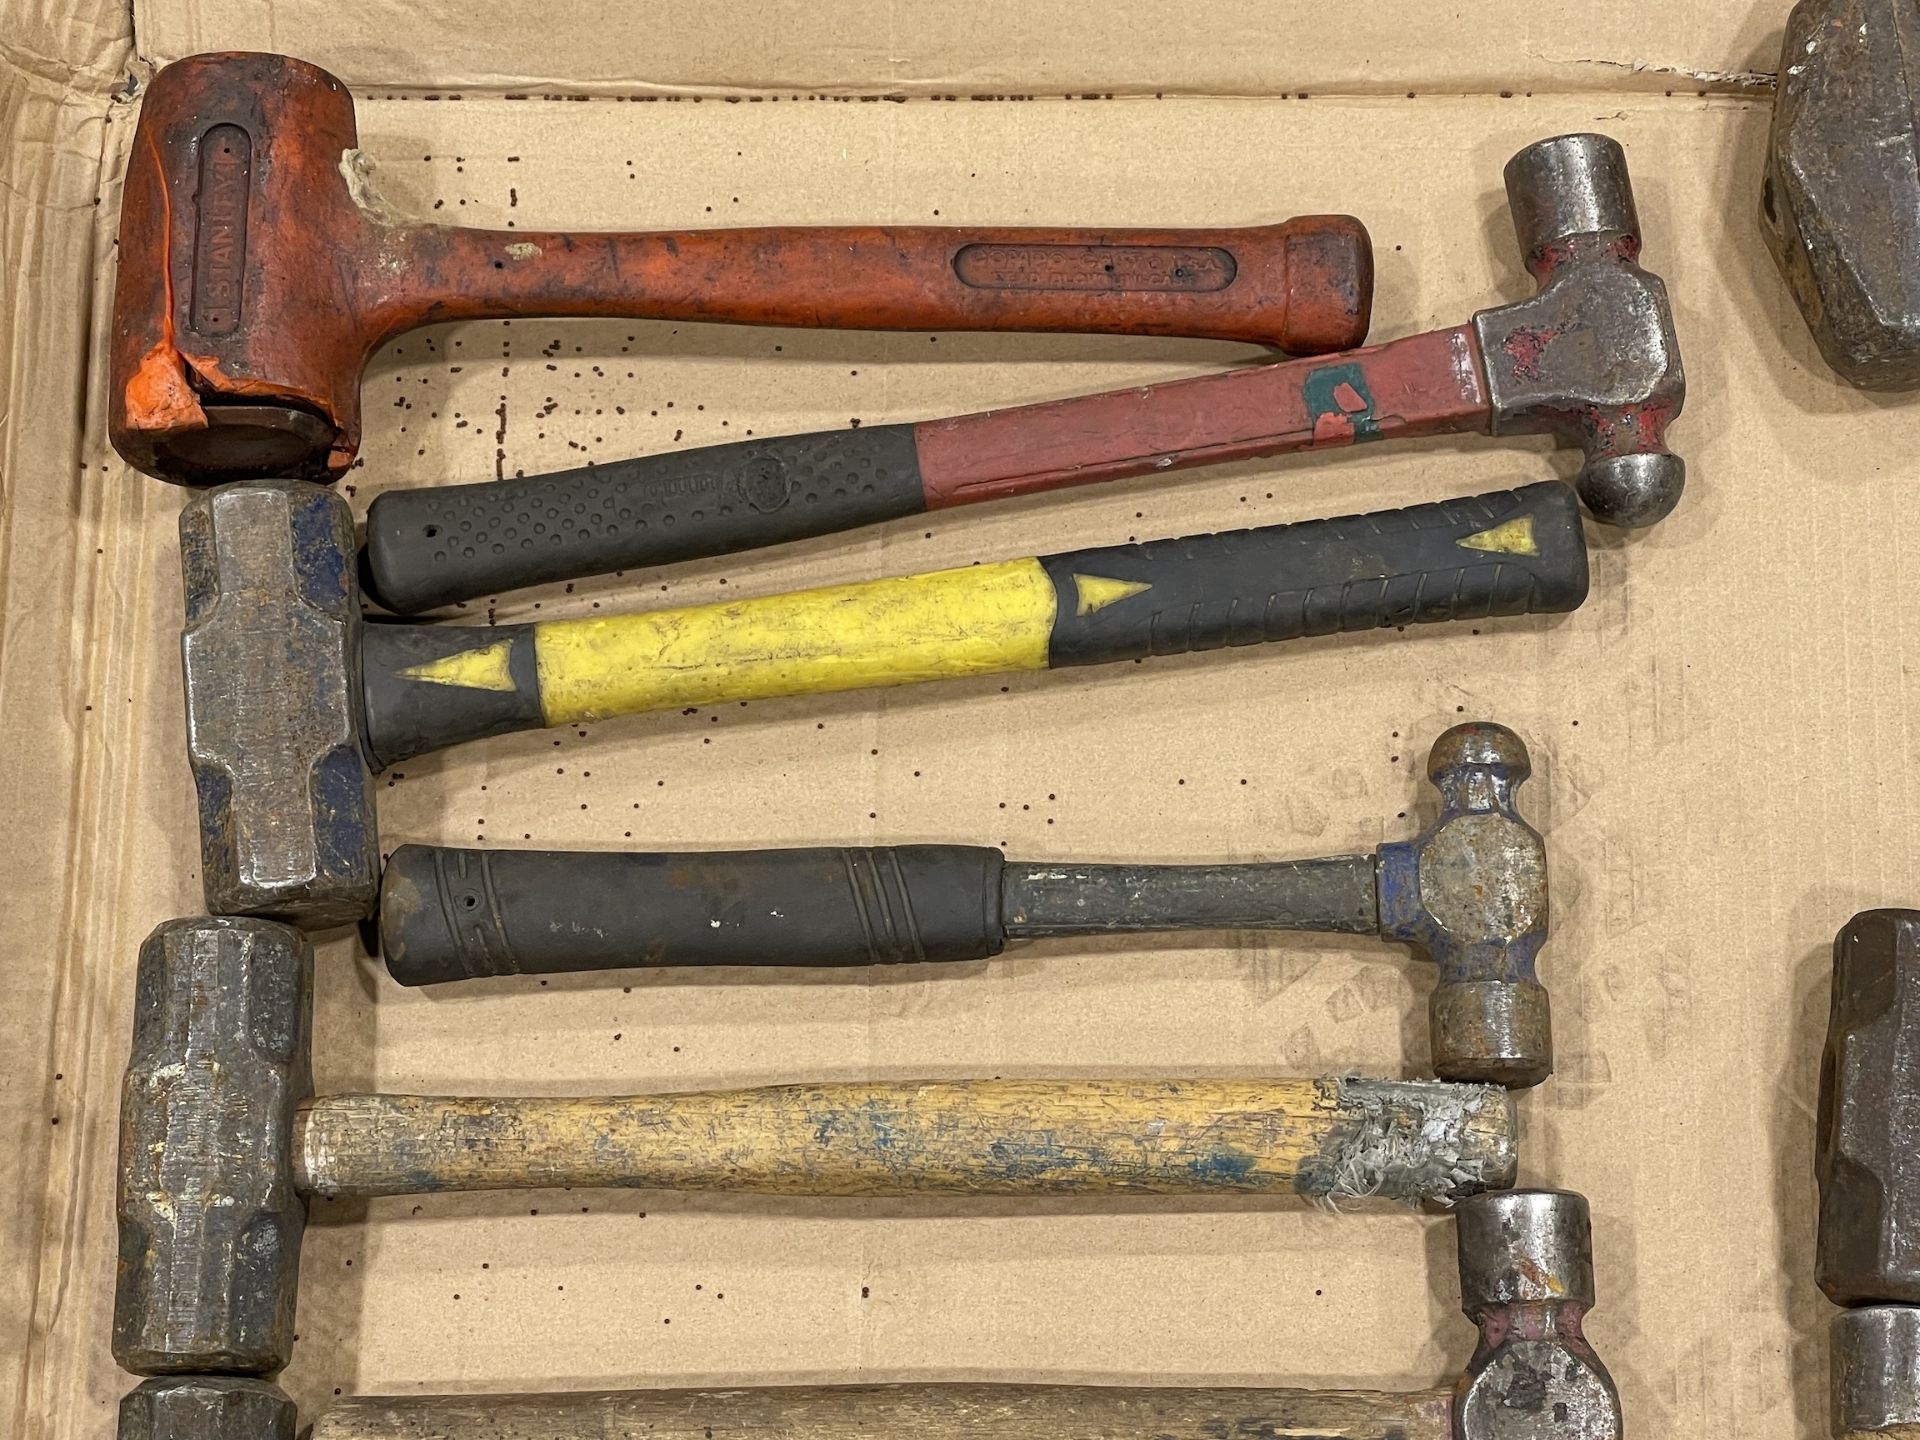 Lot of Hammers - Upland - Image 4 of 11